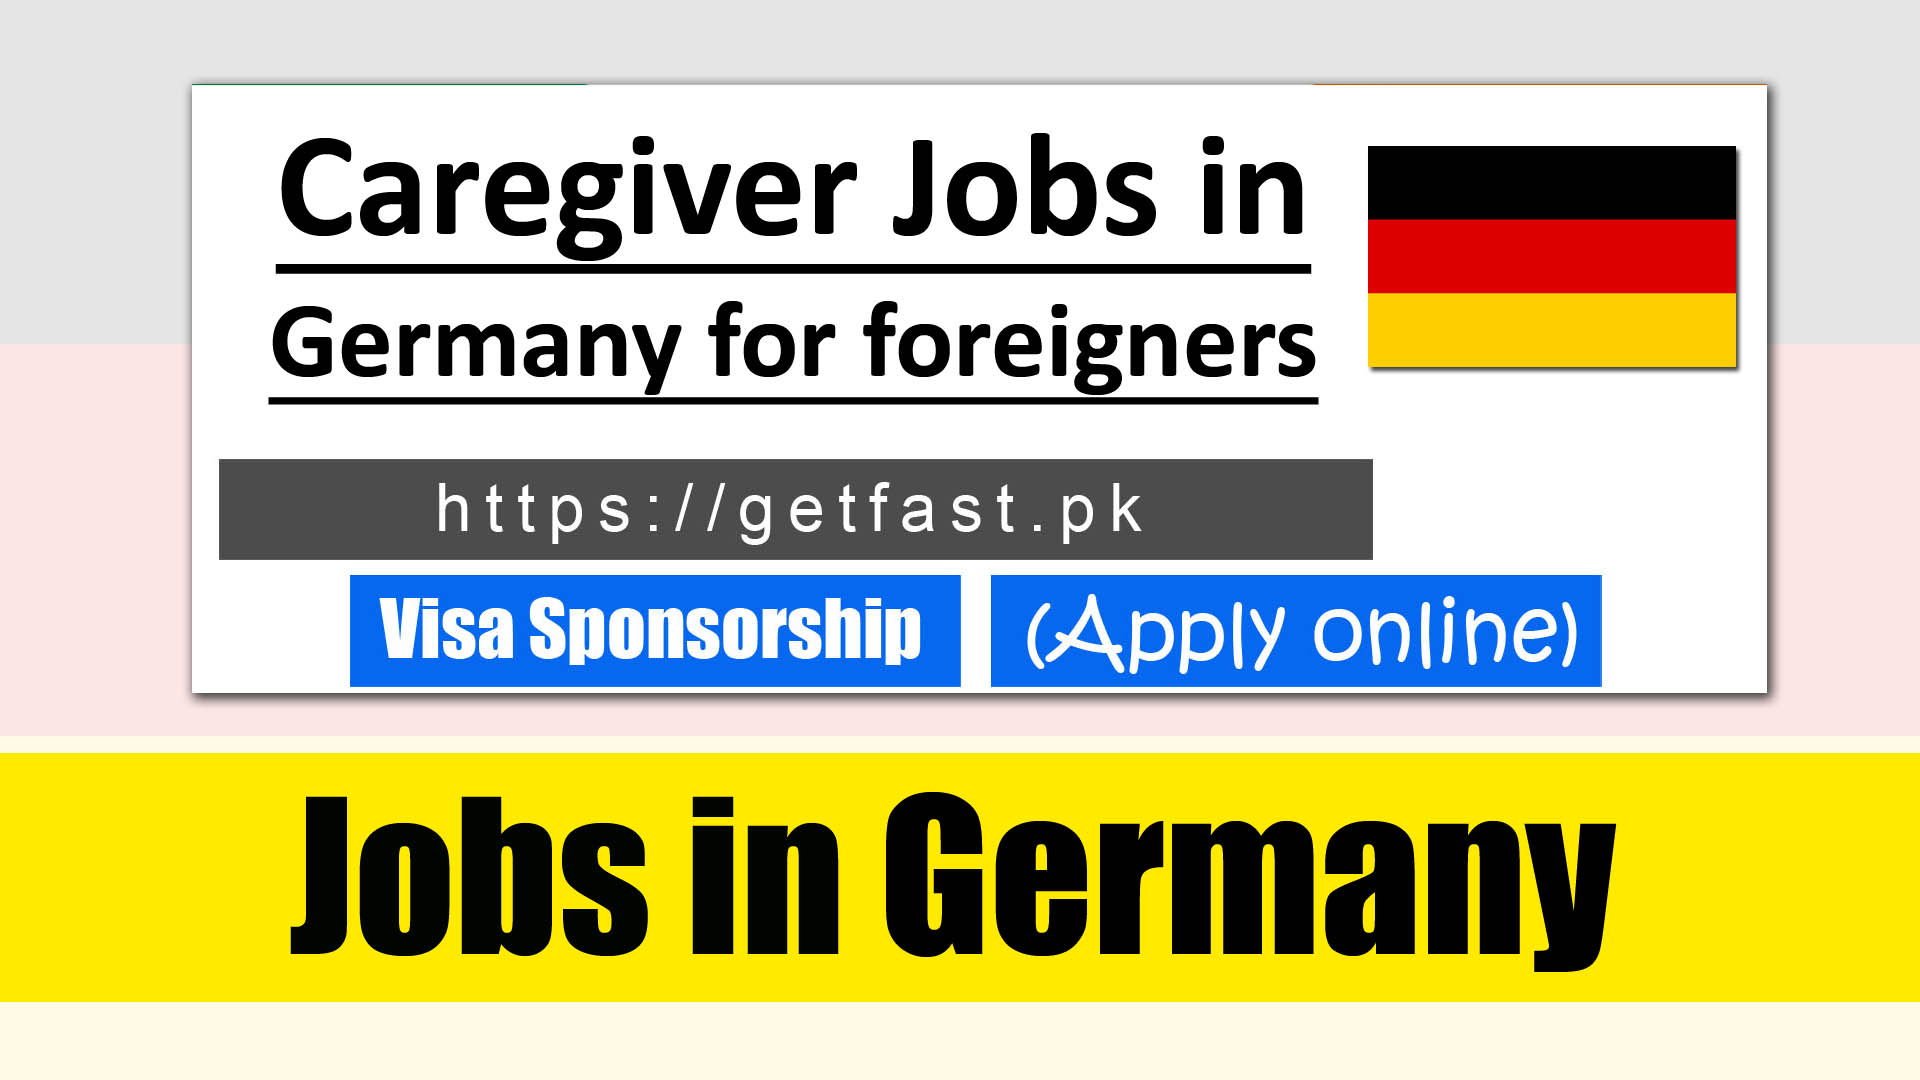 Caregiver Jobs in Germany for foreigners with visa sponsorship 2023 - Apply Online